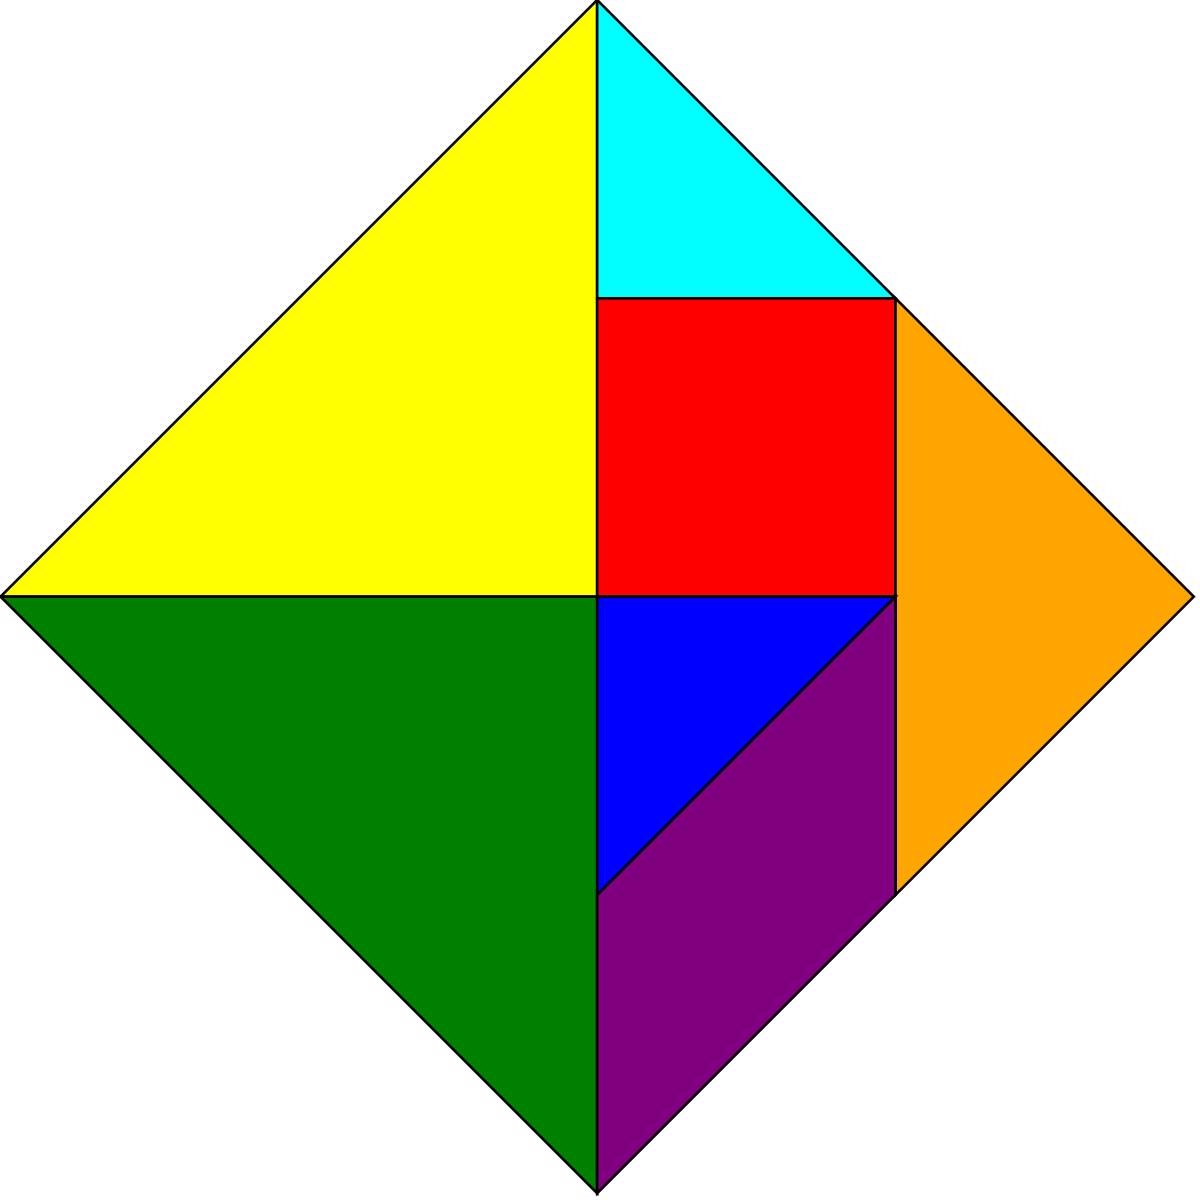 Download File:Tangram square rainbow colors.svg - Wikimedia Commons